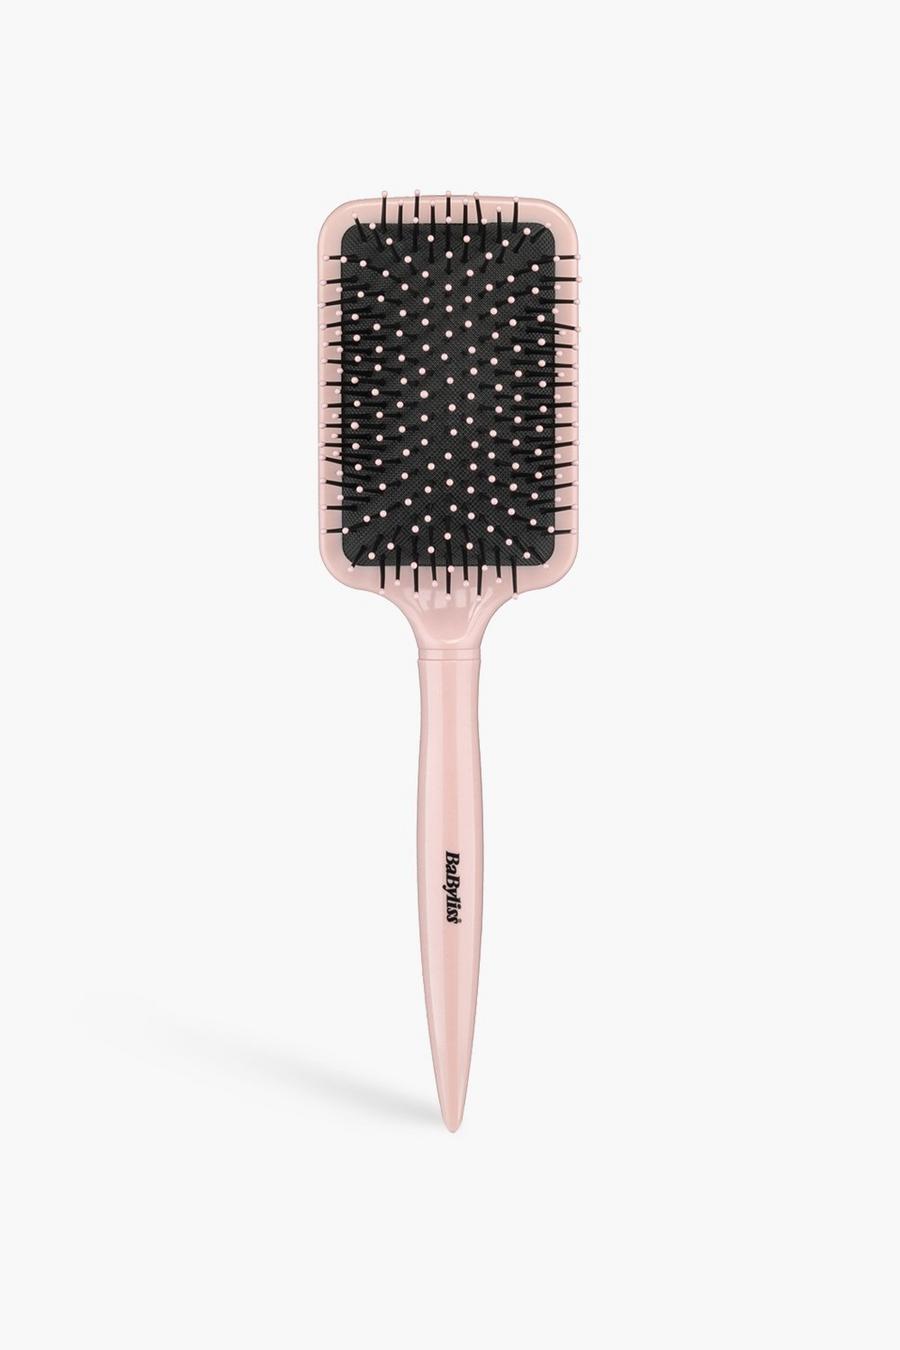 Spazzola Paddle color rosa cipria di Babyliss image number 1